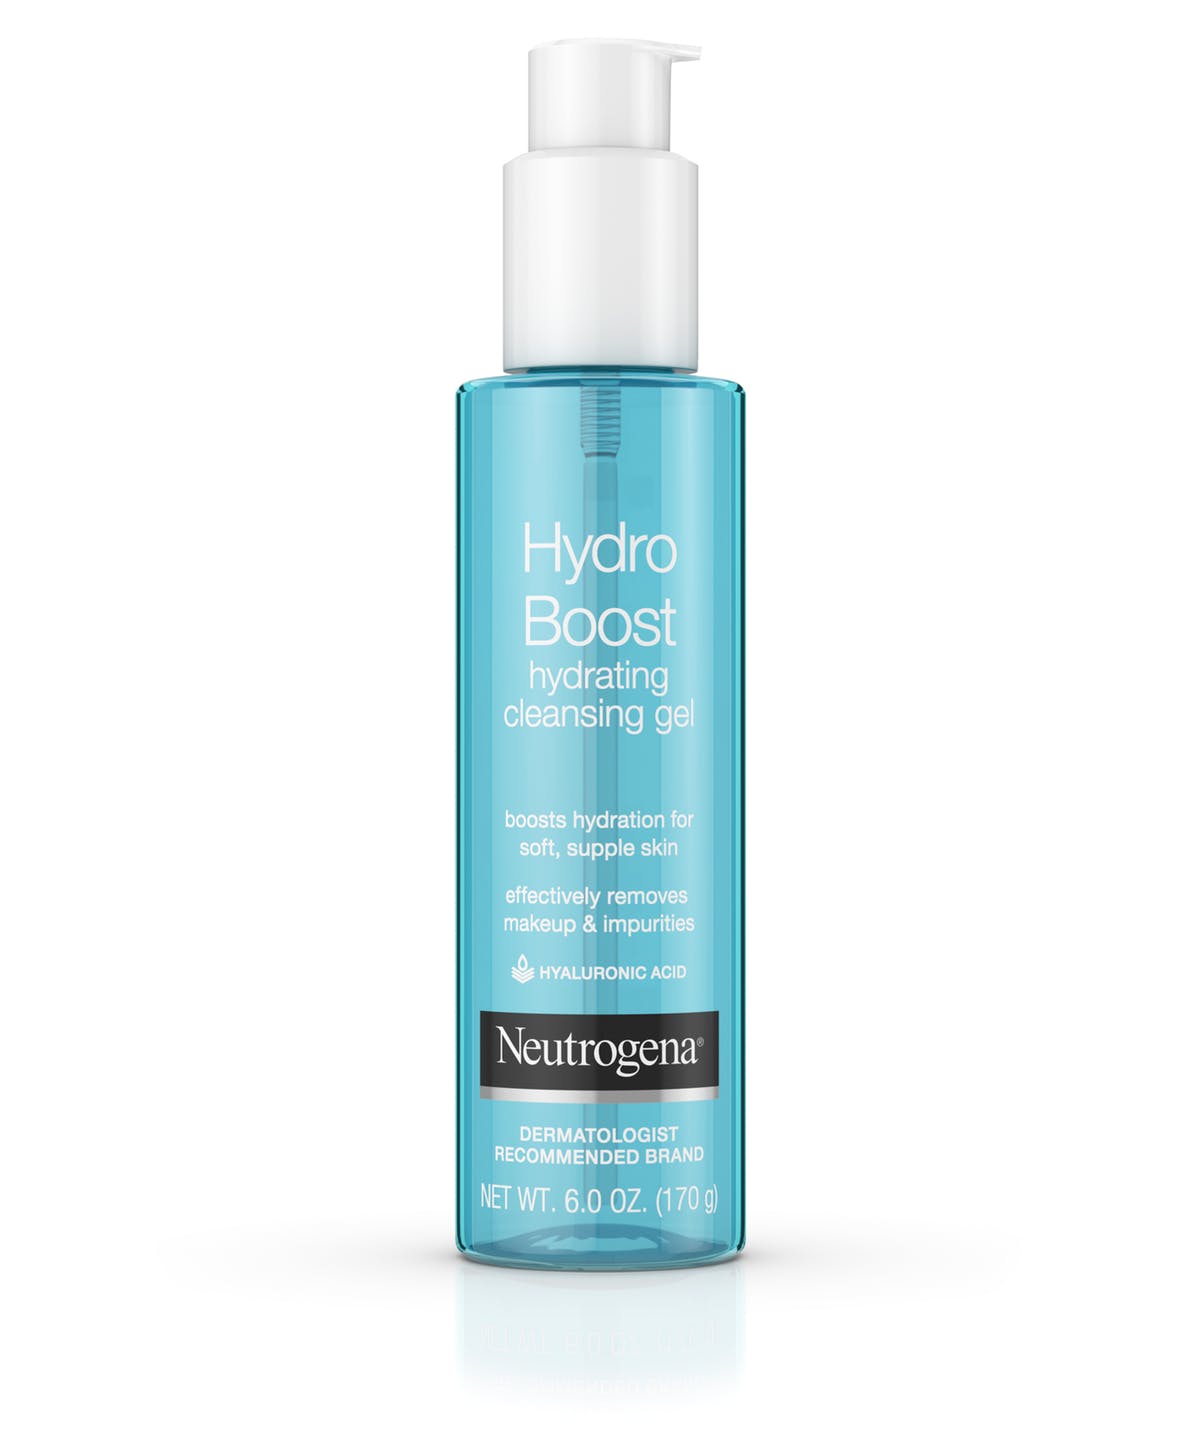 Neutrogena Hydro Boost Hydrating Cleansing Gel & Oil-Free Makeup Remover with Hyaluronic Acid